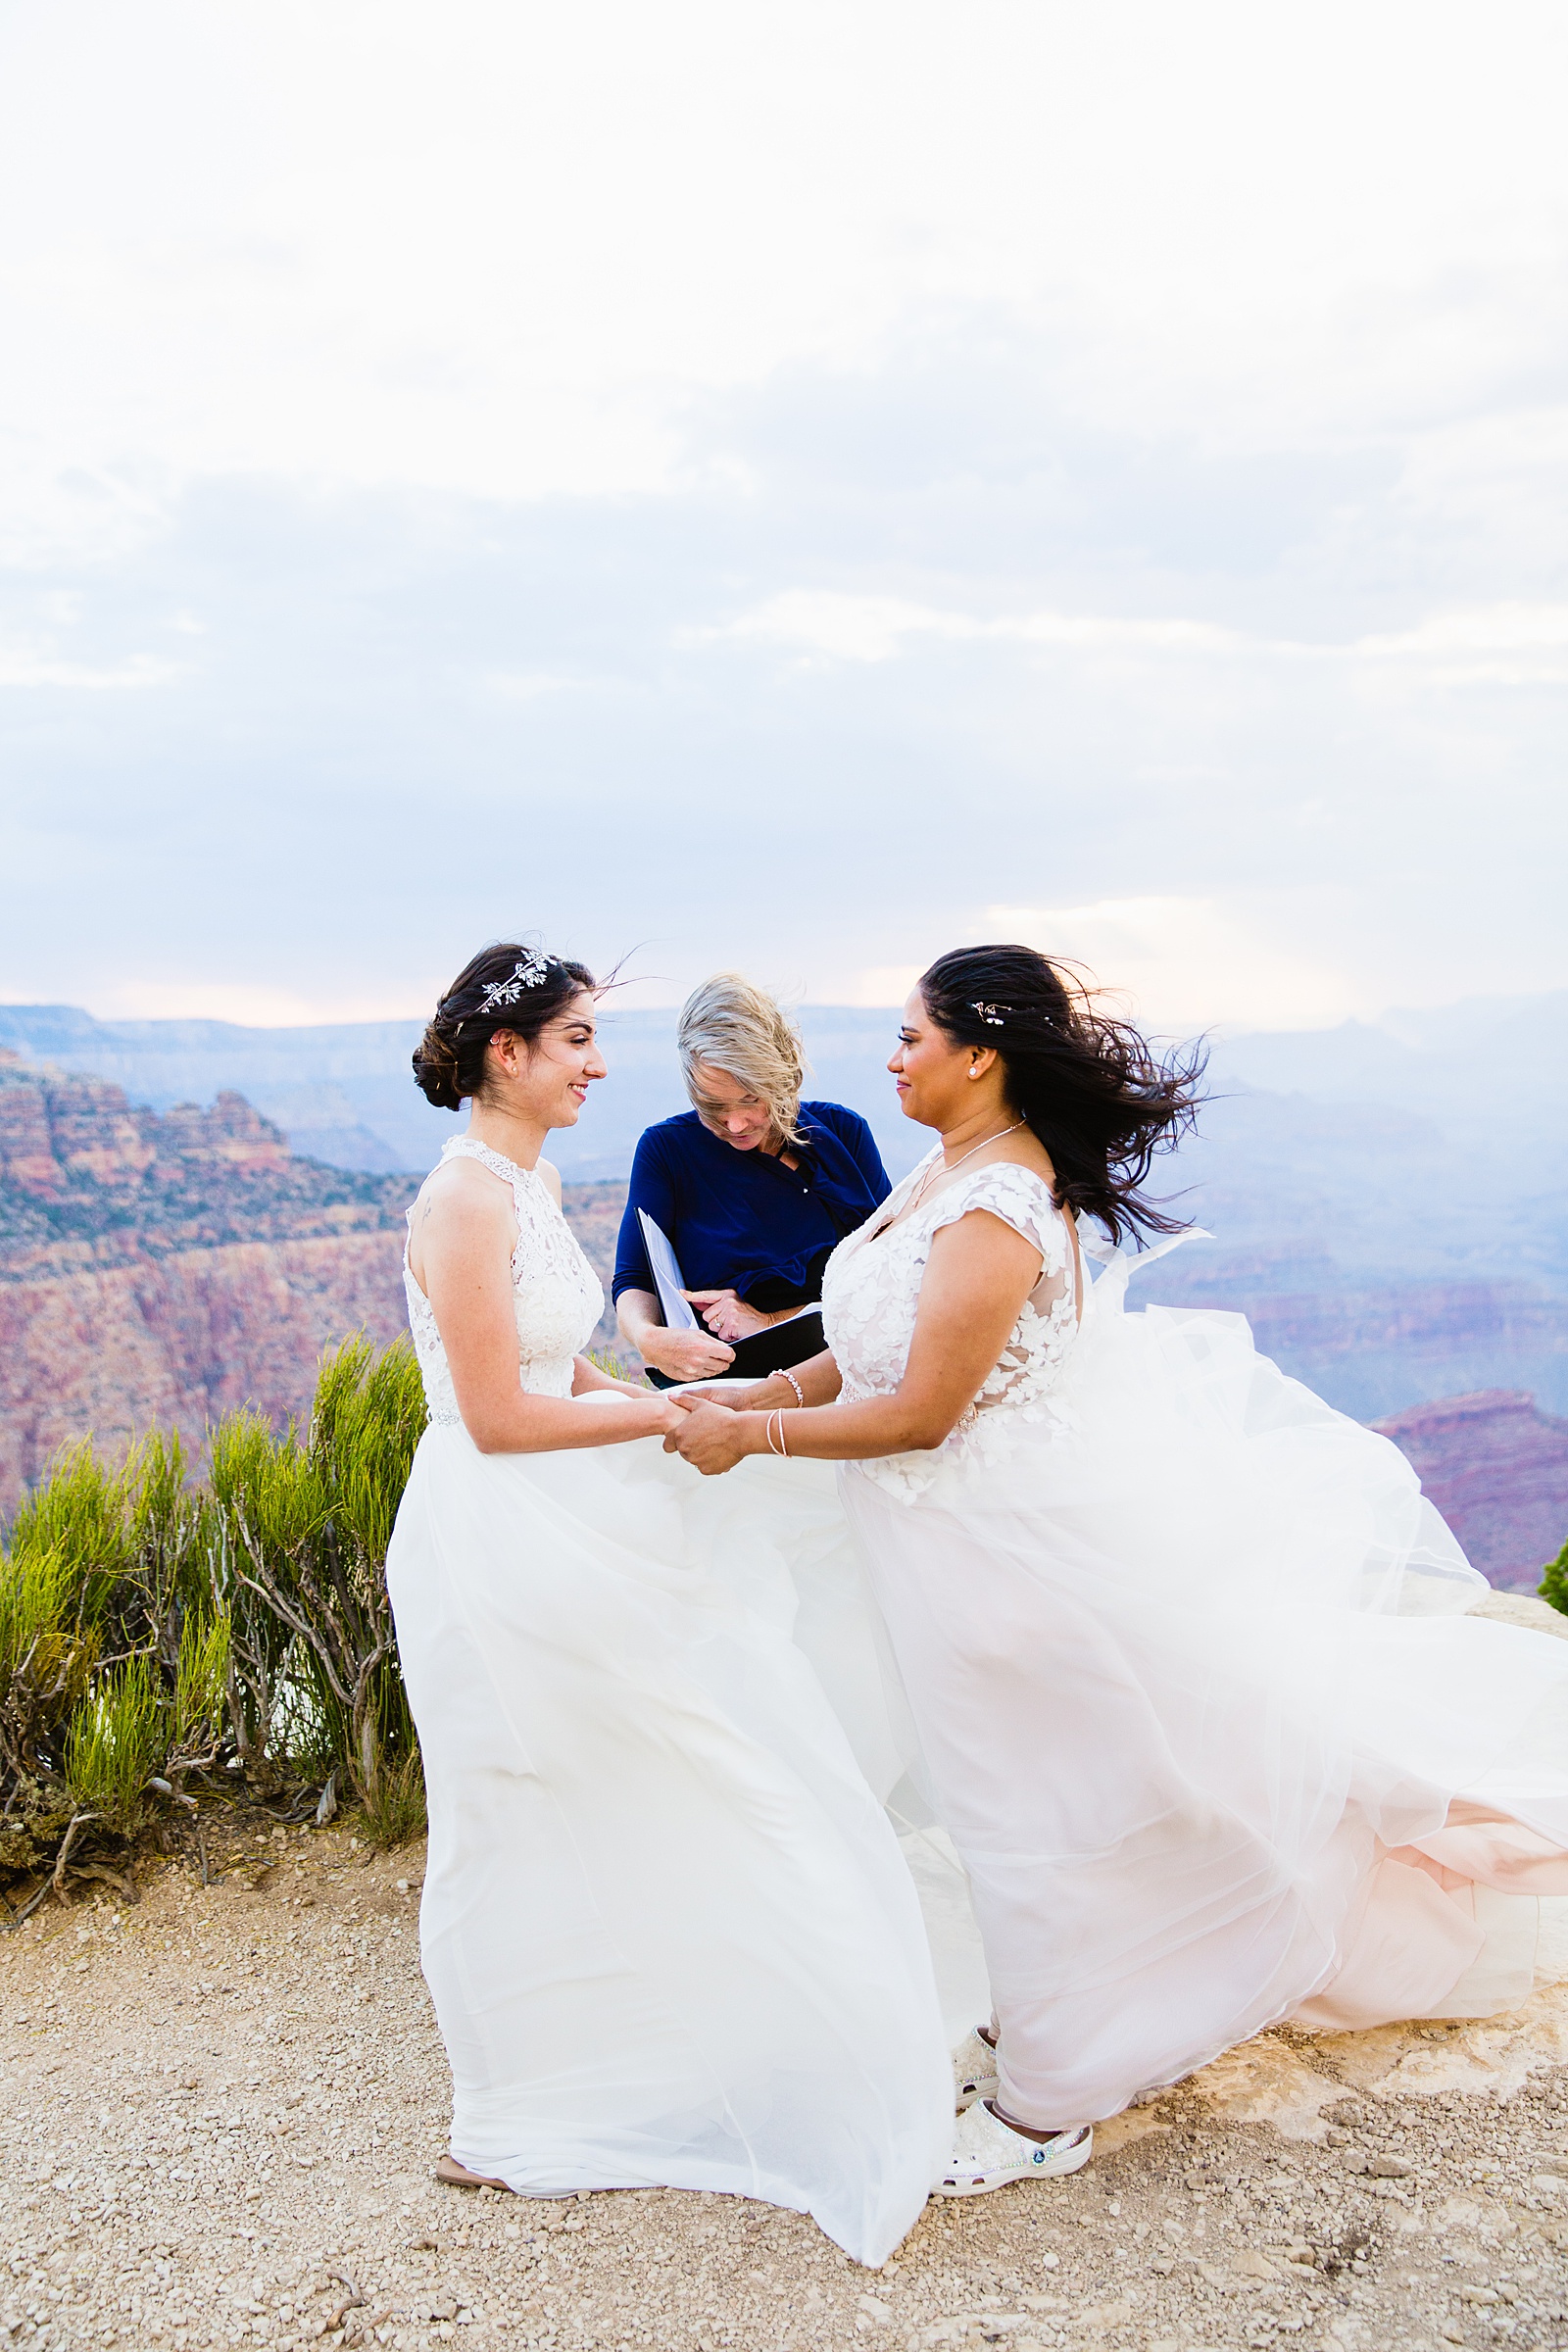 Same sex couple exchange rings during their wedding ceremony at Moran Point by Arizona elopement photographer PMA Photography.